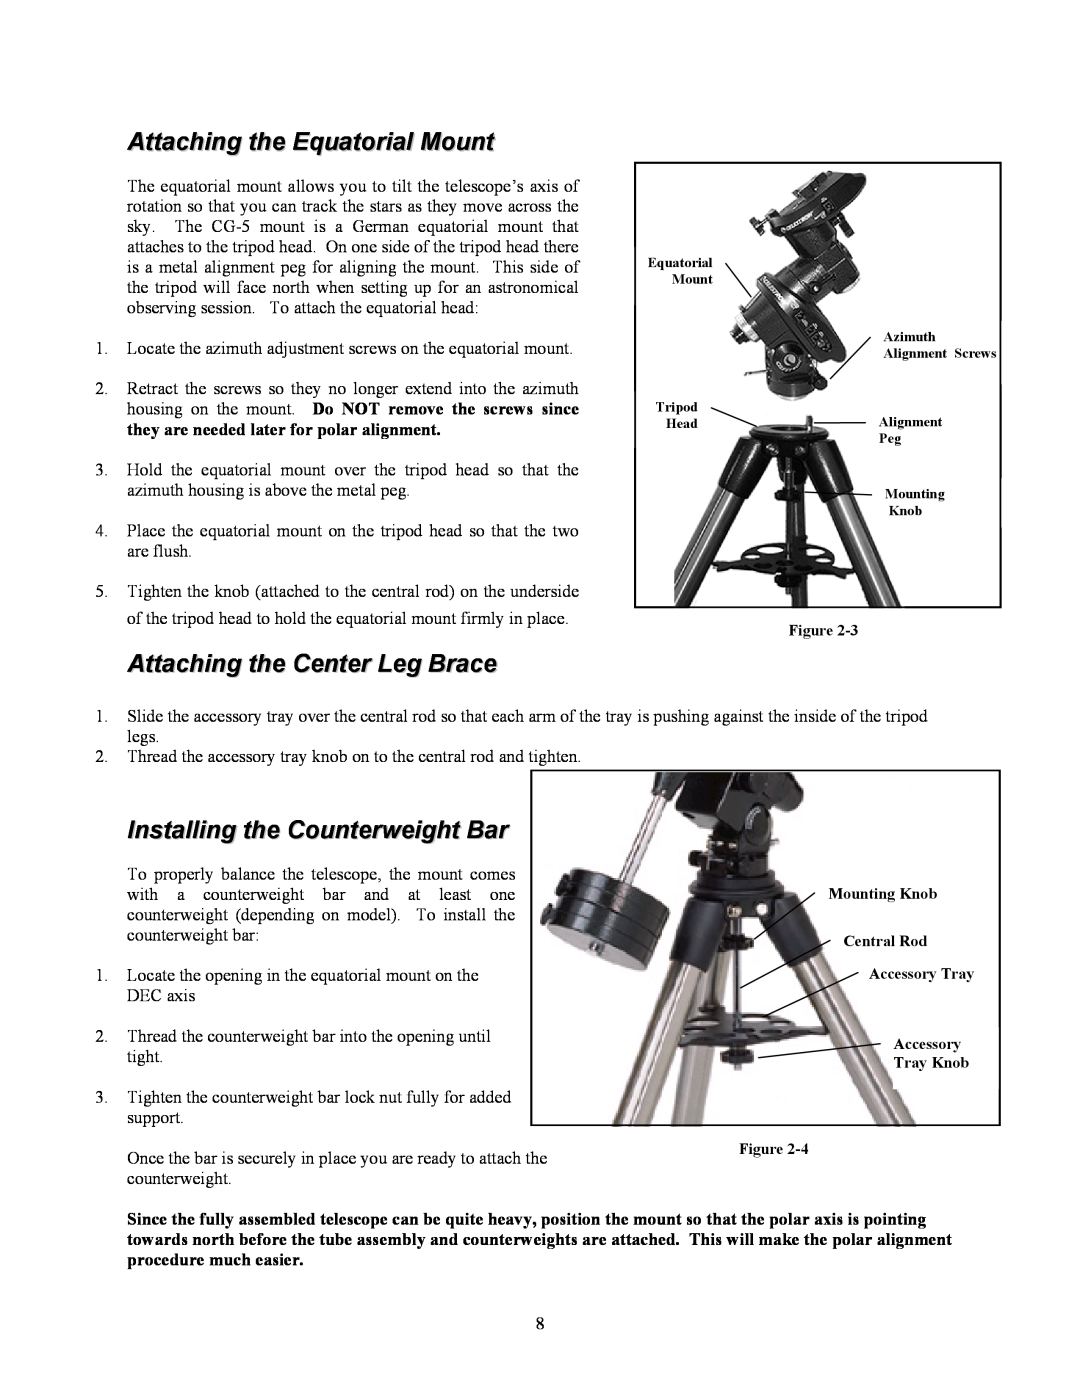 Celestron C5-S, C8-S, C9-S Attaching the Equatorial Mount, Attaching the Center Leg Brace, Installing the Counterweight Bar 